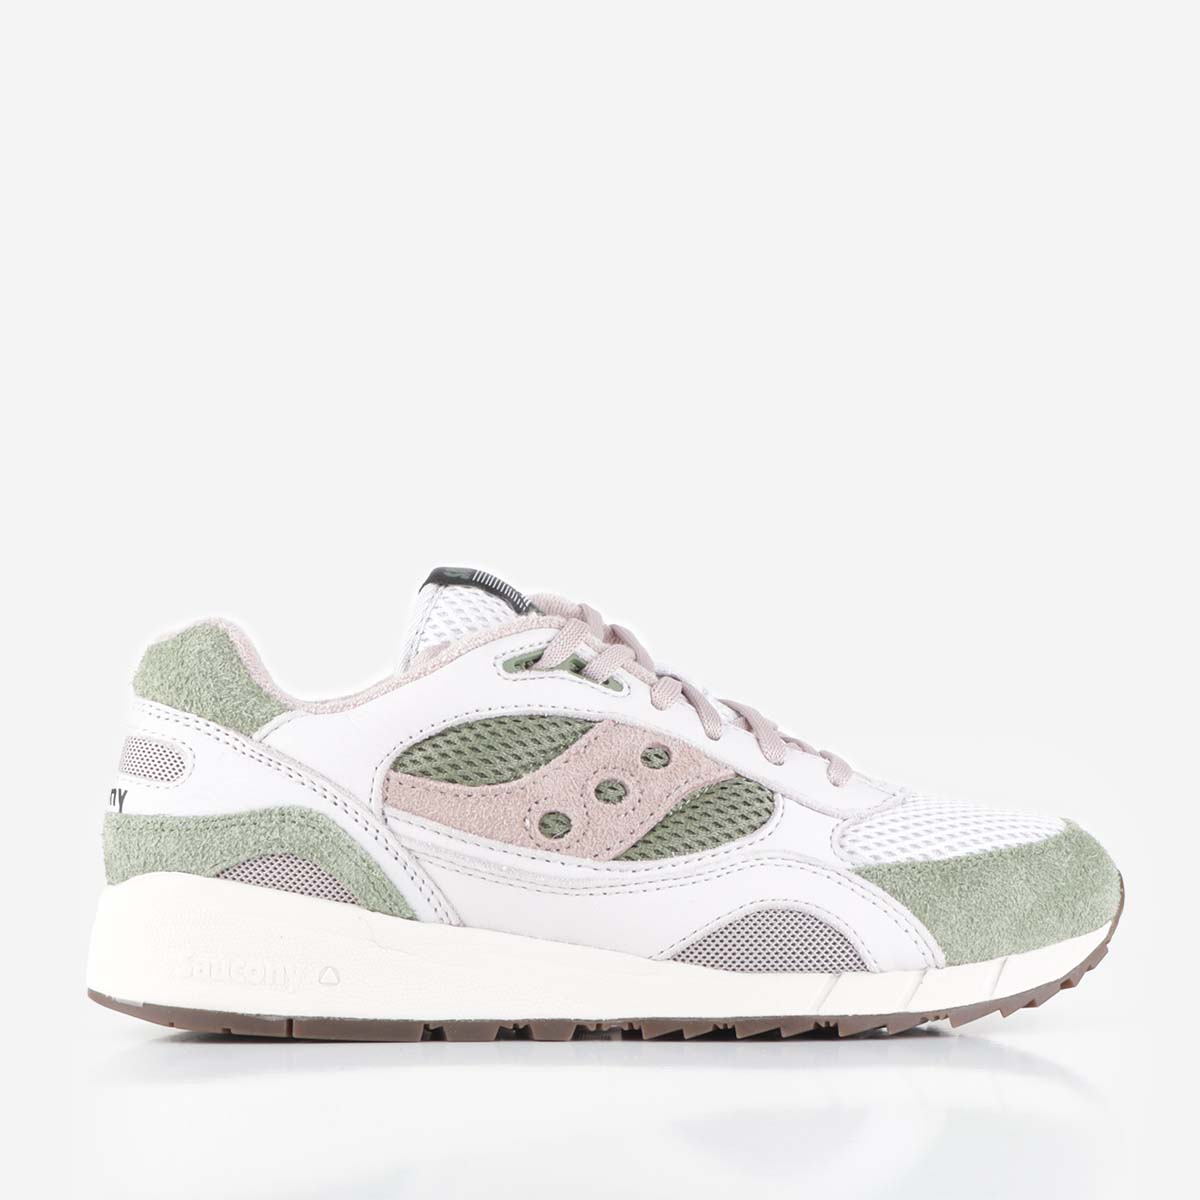 Saucony Shadow 6000 Shoes, Grey Green, Detail Shot 1